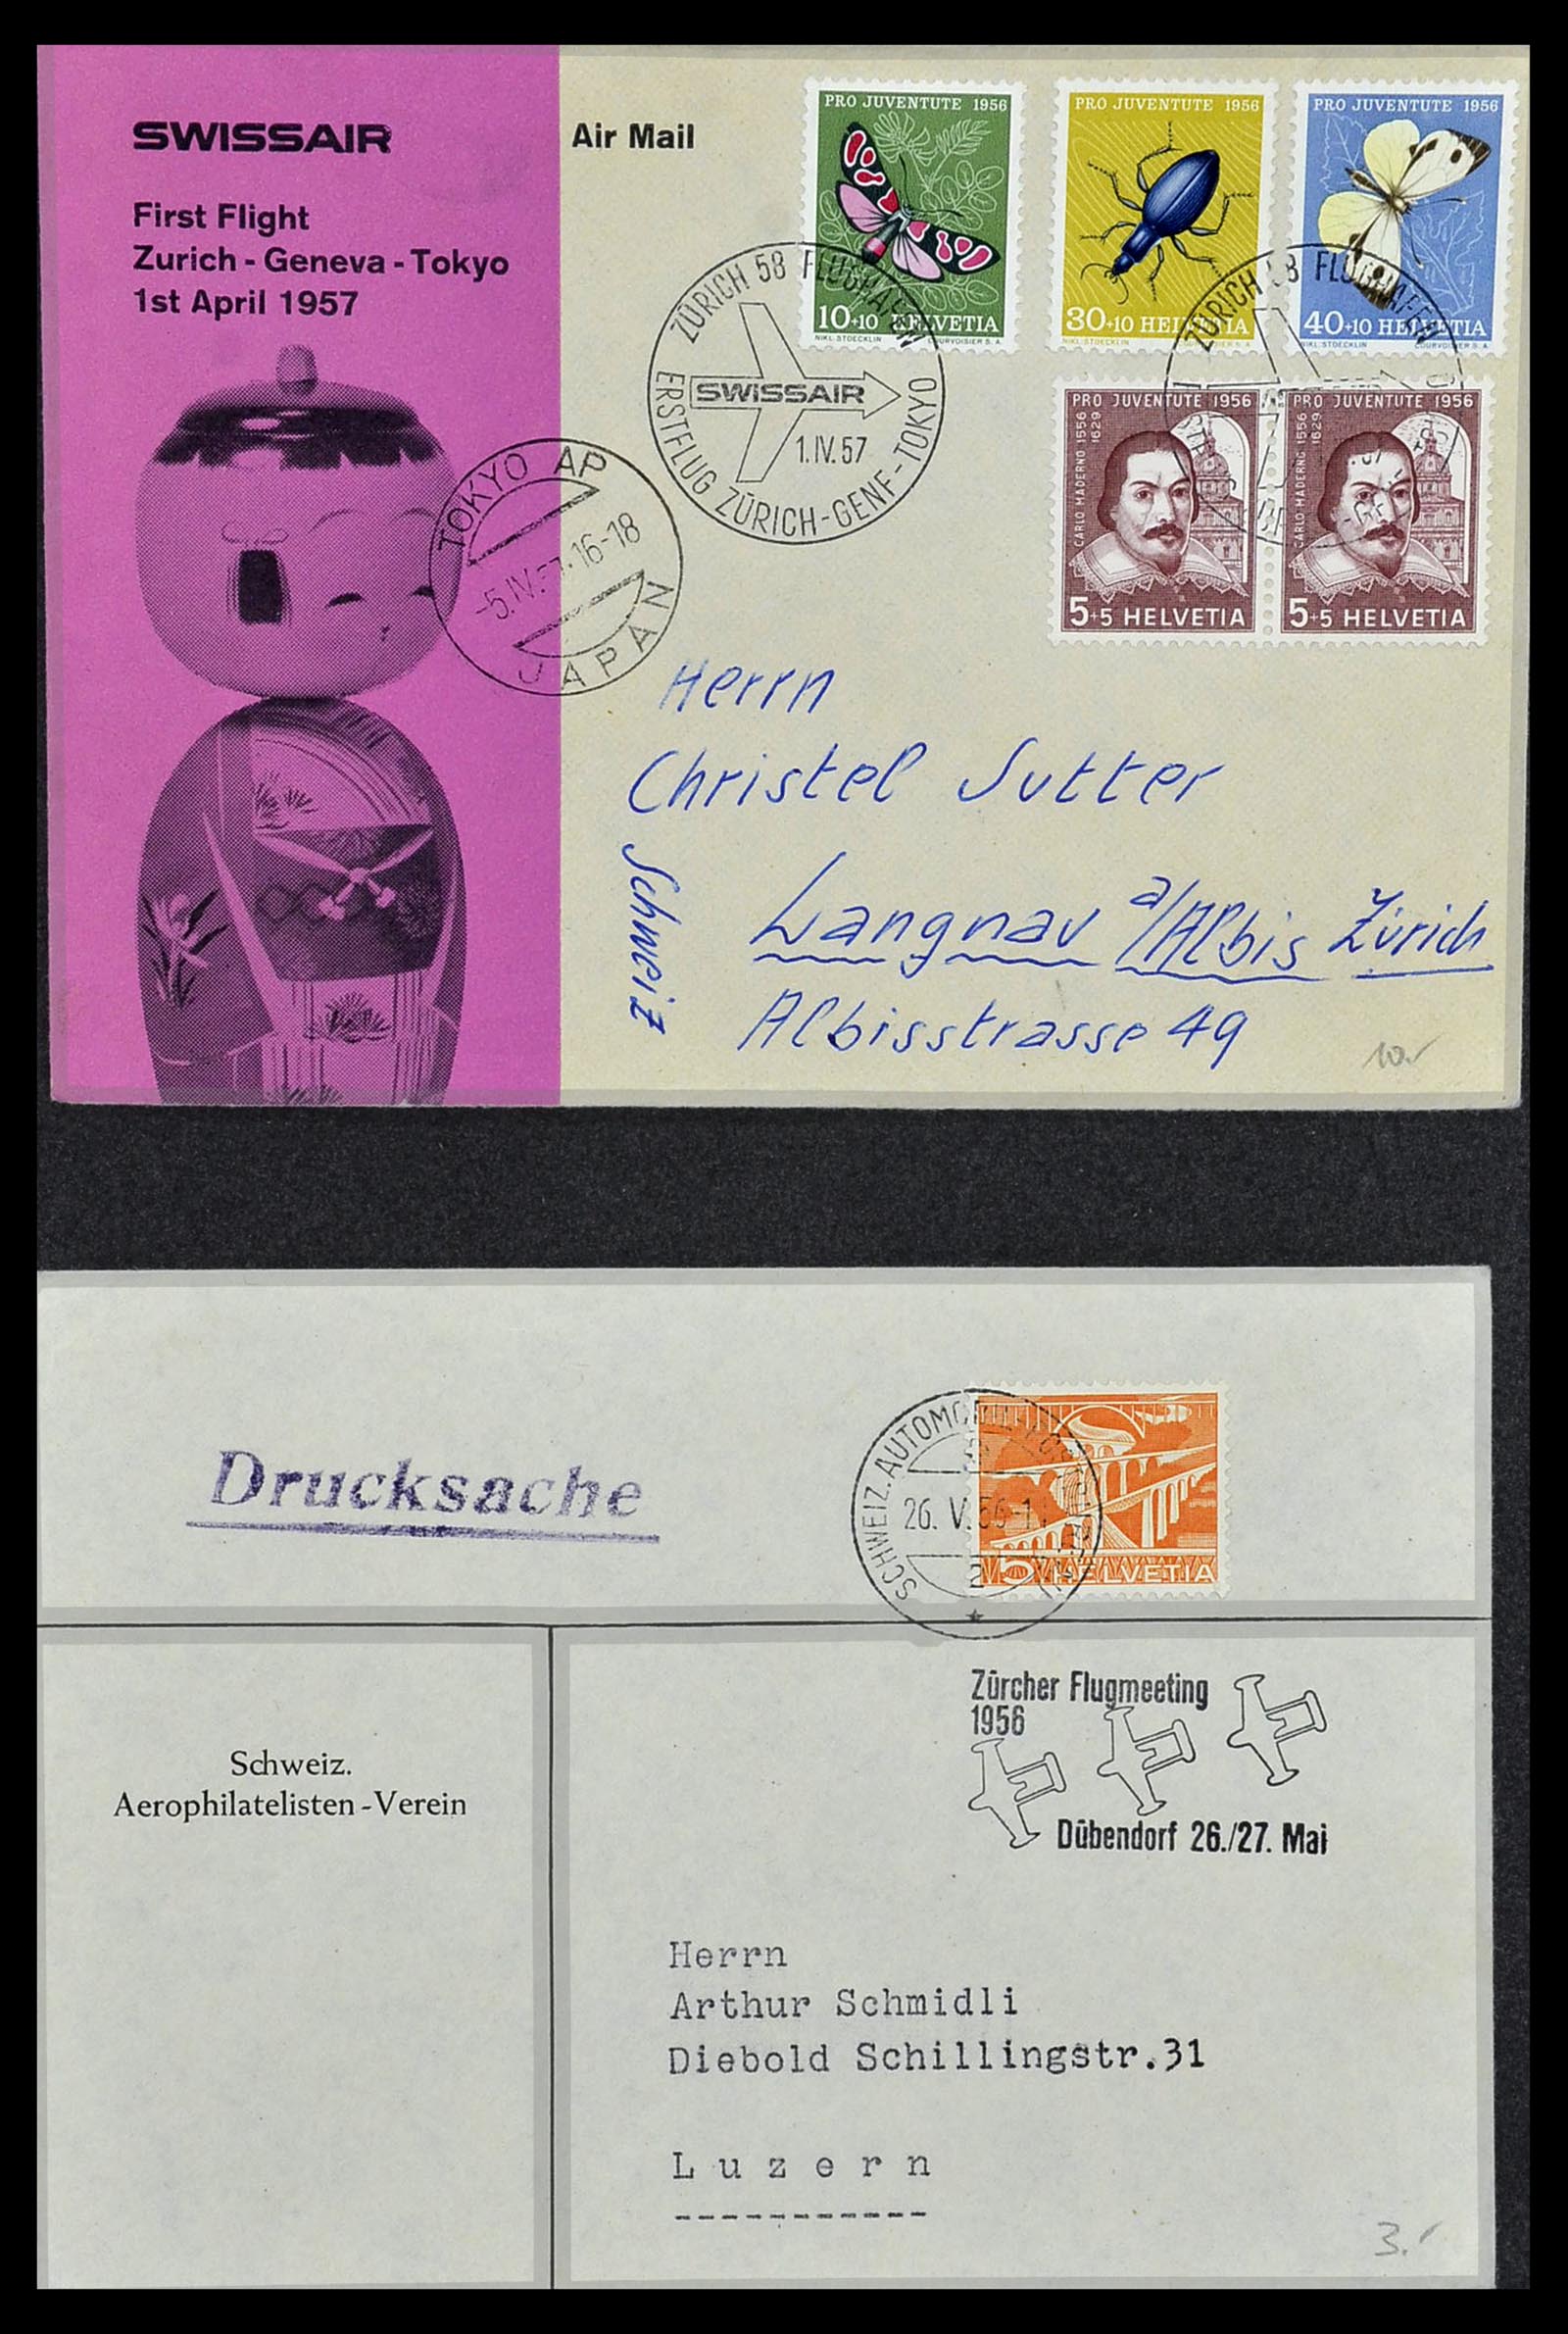 34141 057 - Stamp collection 34141 Switzerland airmail covers 1920-1960.